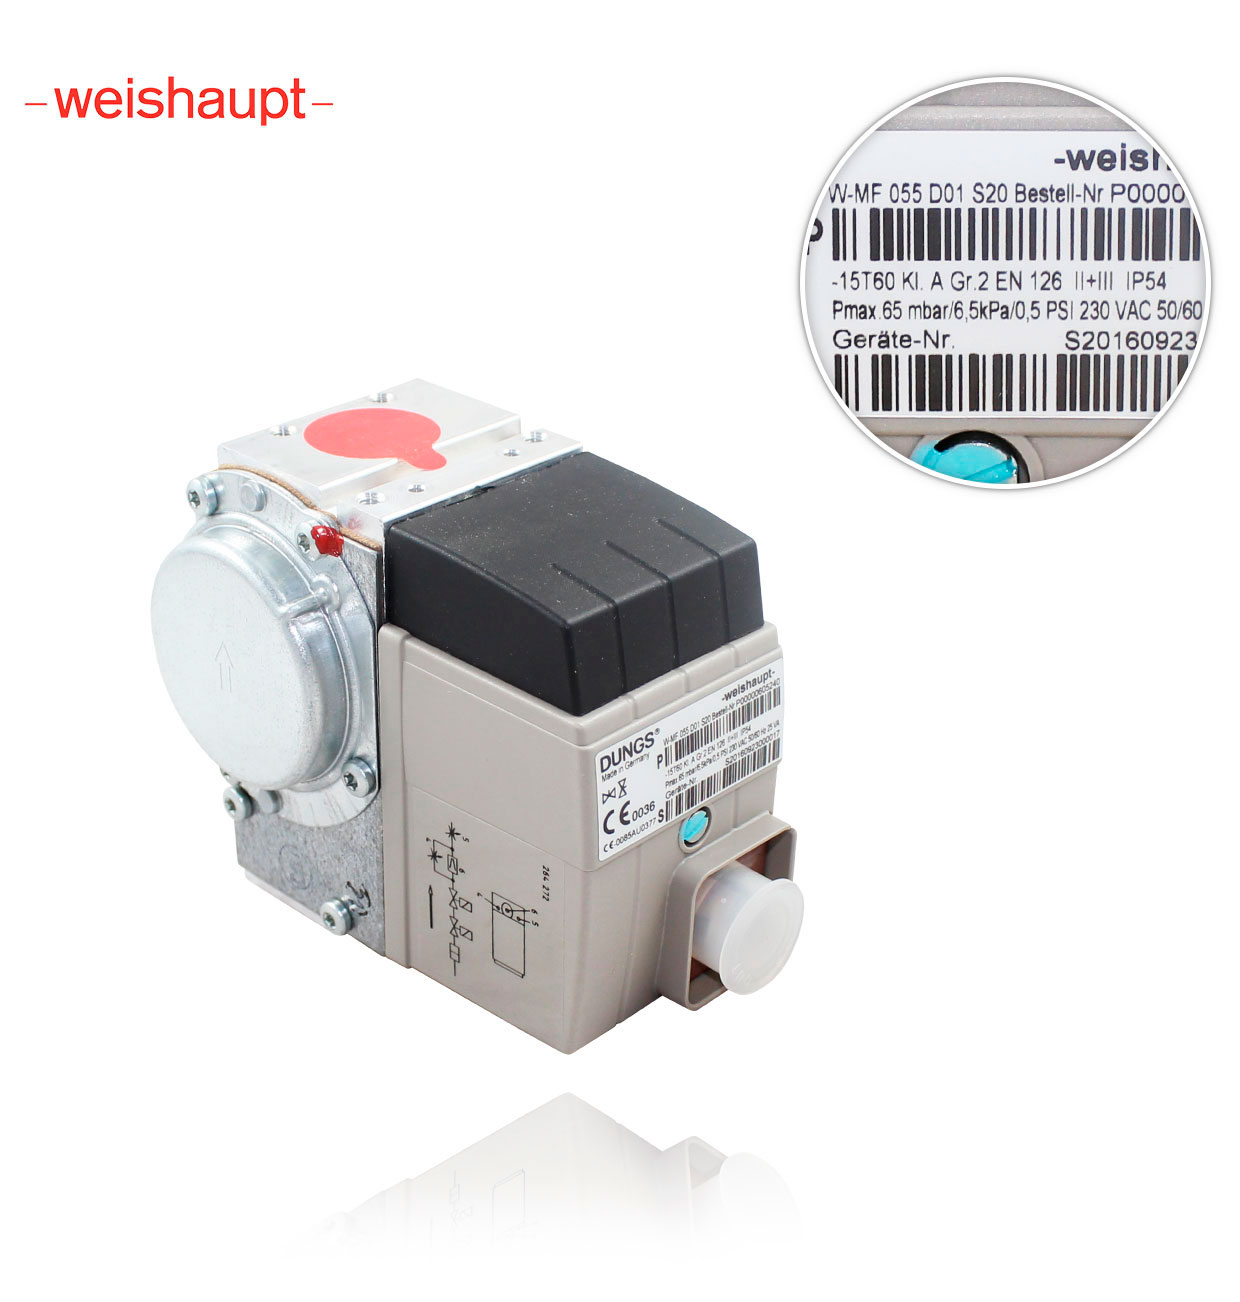 W-FM055 D01 S20t Rp 1/2" 230V WG5 WEISHAUPT 605240